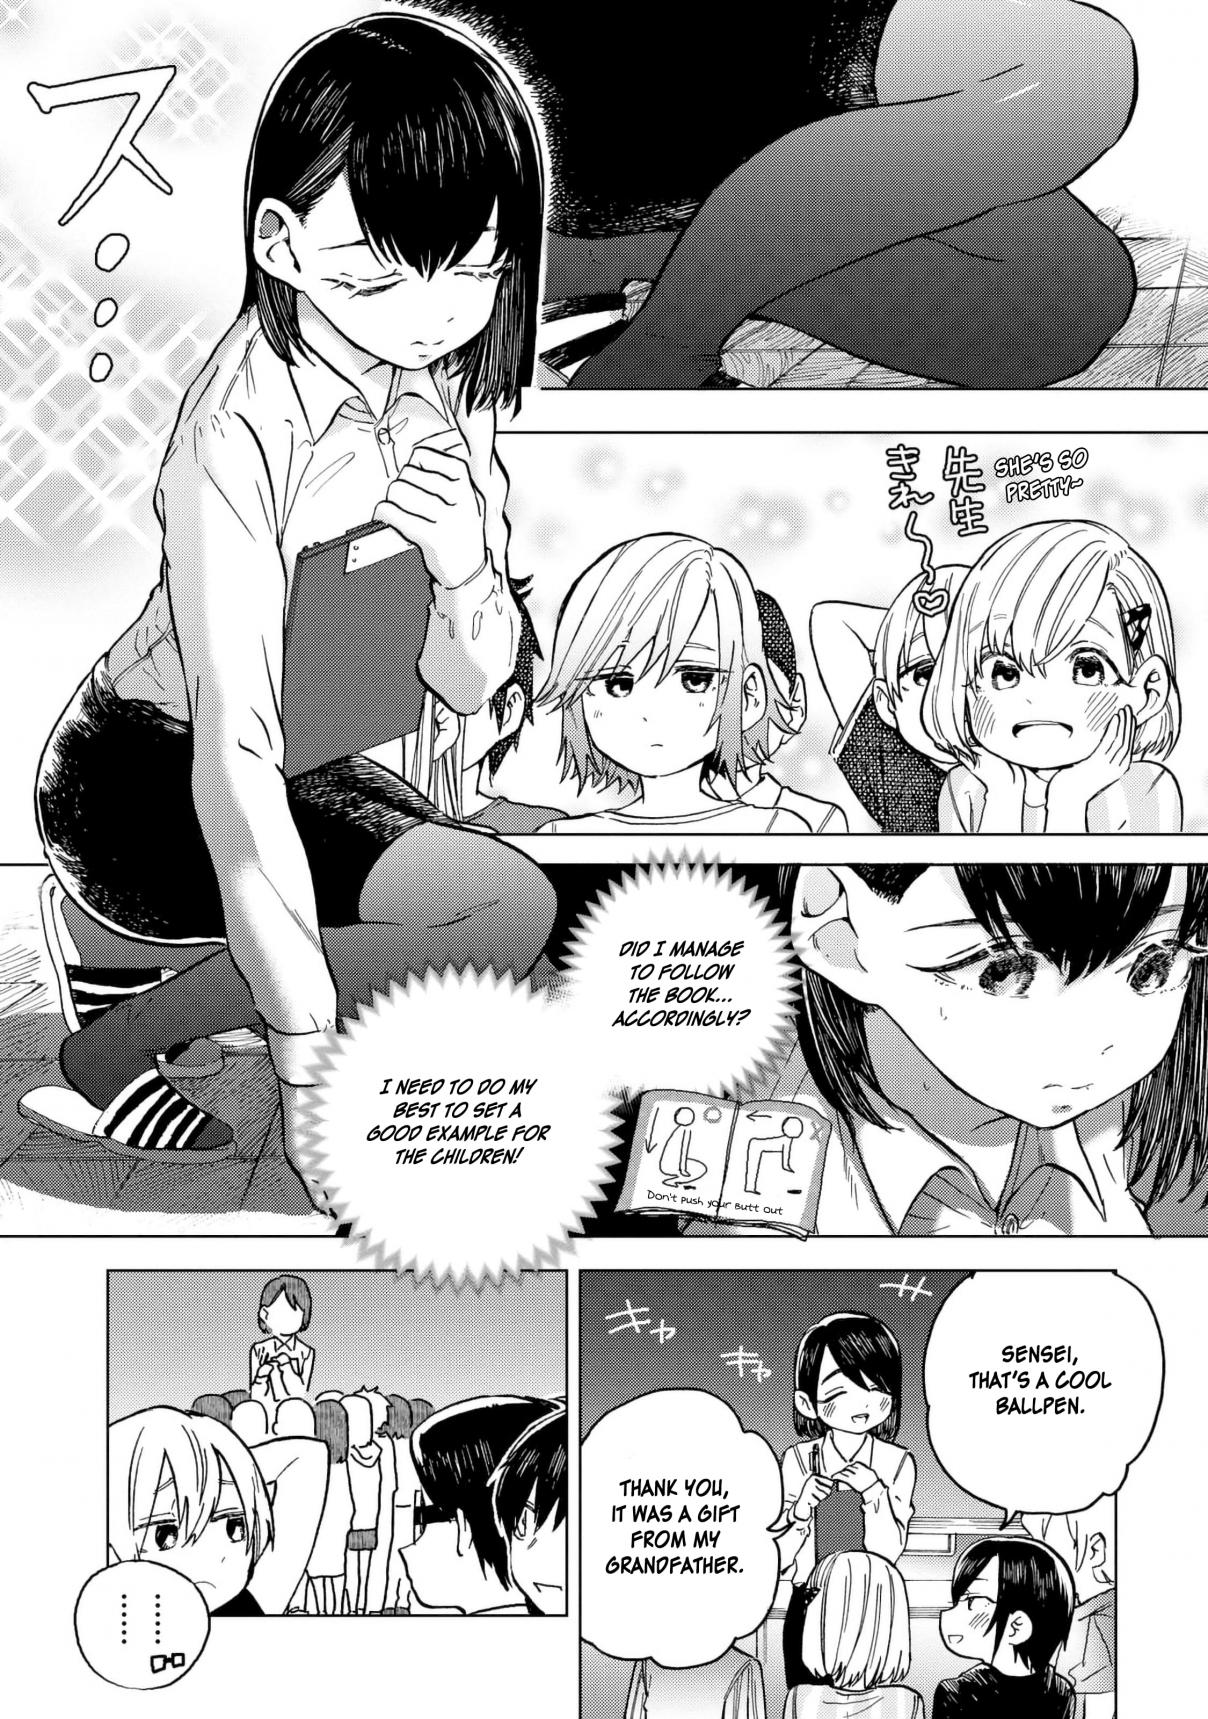 Eguchi kun Doesn't Miss a Thing Vol. 2 Ch. 7 The First "Slightly Erotic" Situation